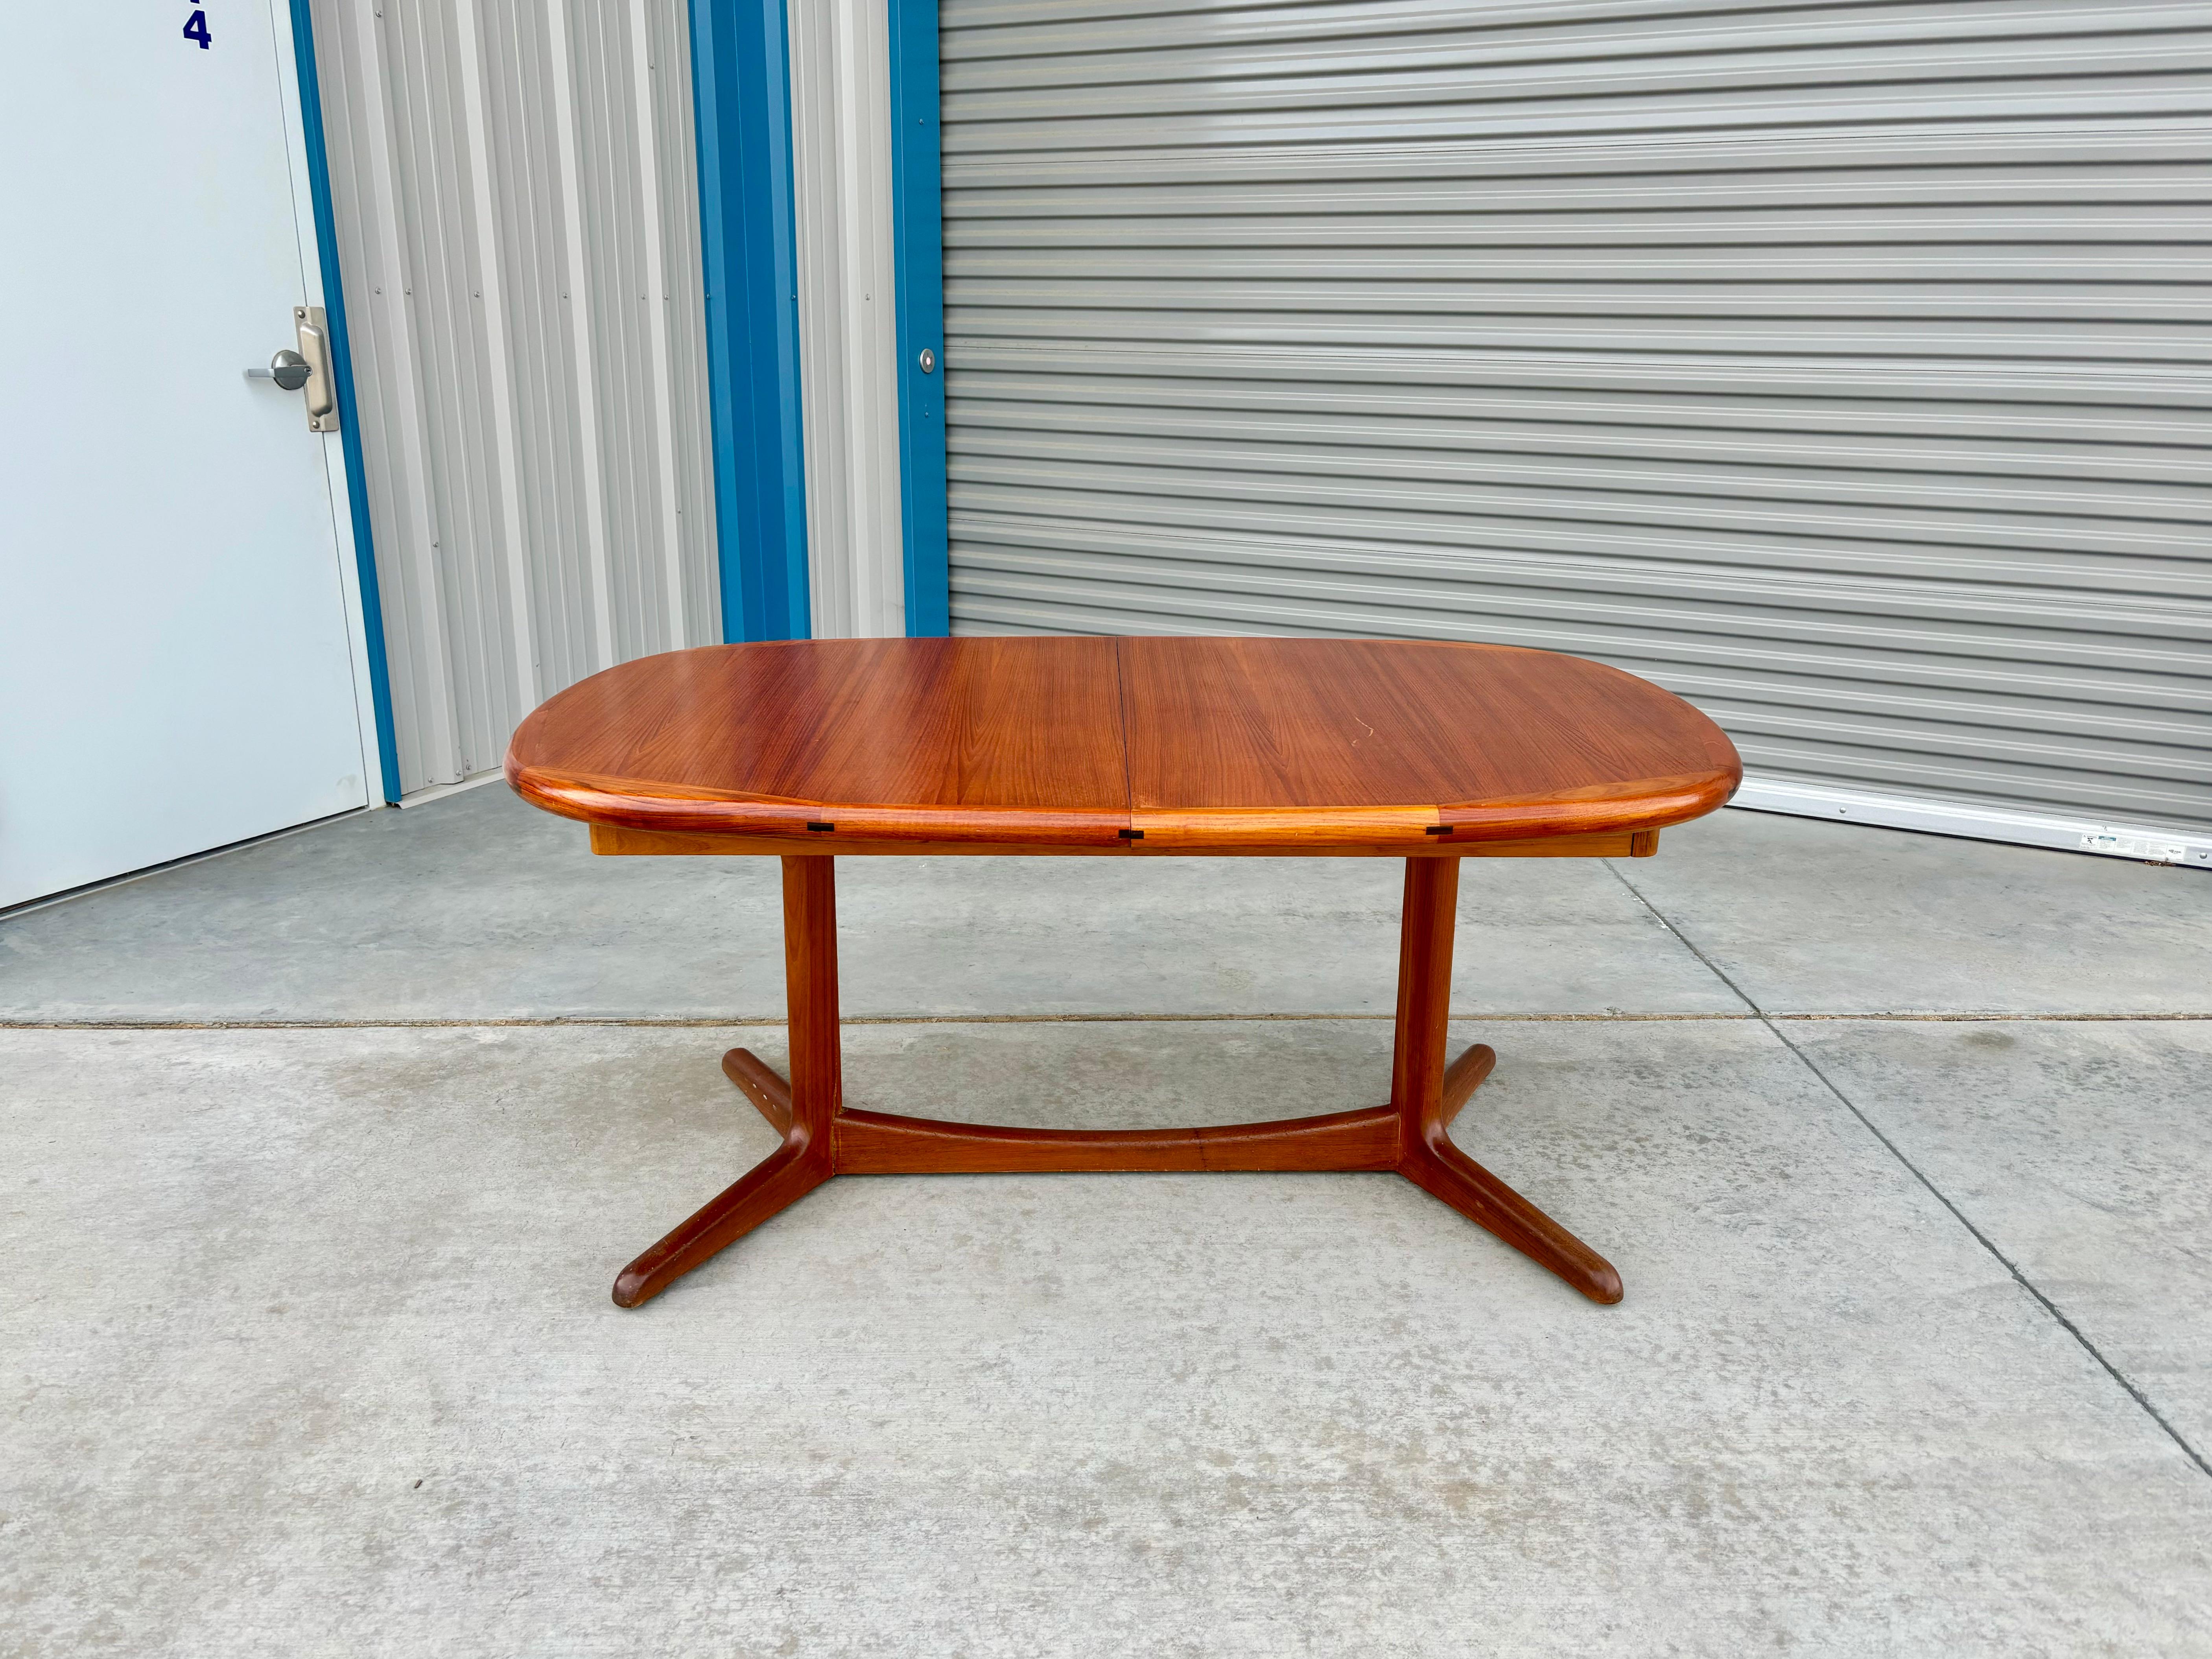 Danish modern teak extendable dining table designed and manufactured in Denmark circa 1960s. The table features a sleek teak frame perched atop an elegant teak pedestal, exuding a perfect balance of form and function. The table is not only a visual